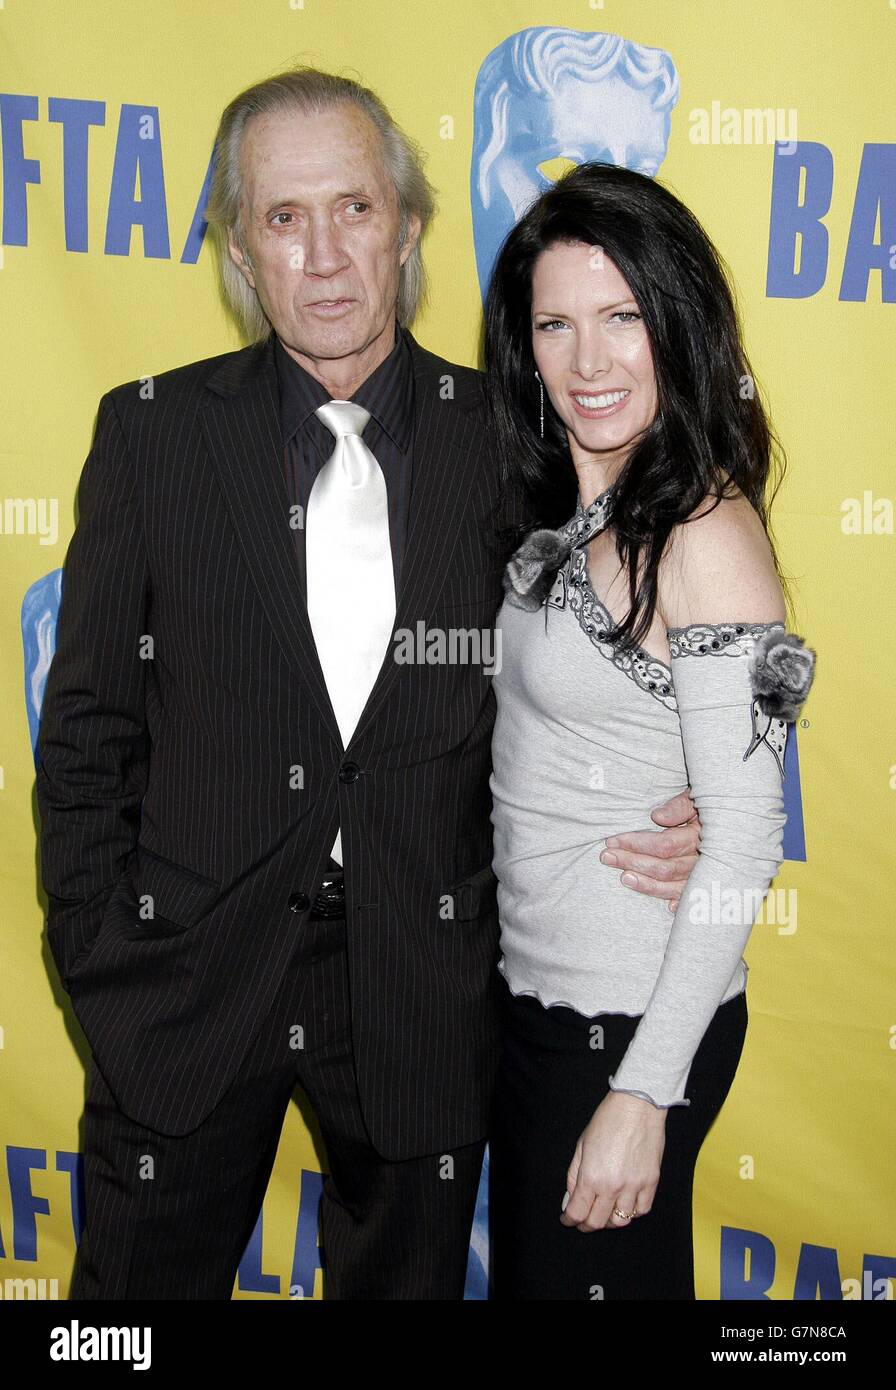 David carradine and wife annie hires stock photography and images Alamy